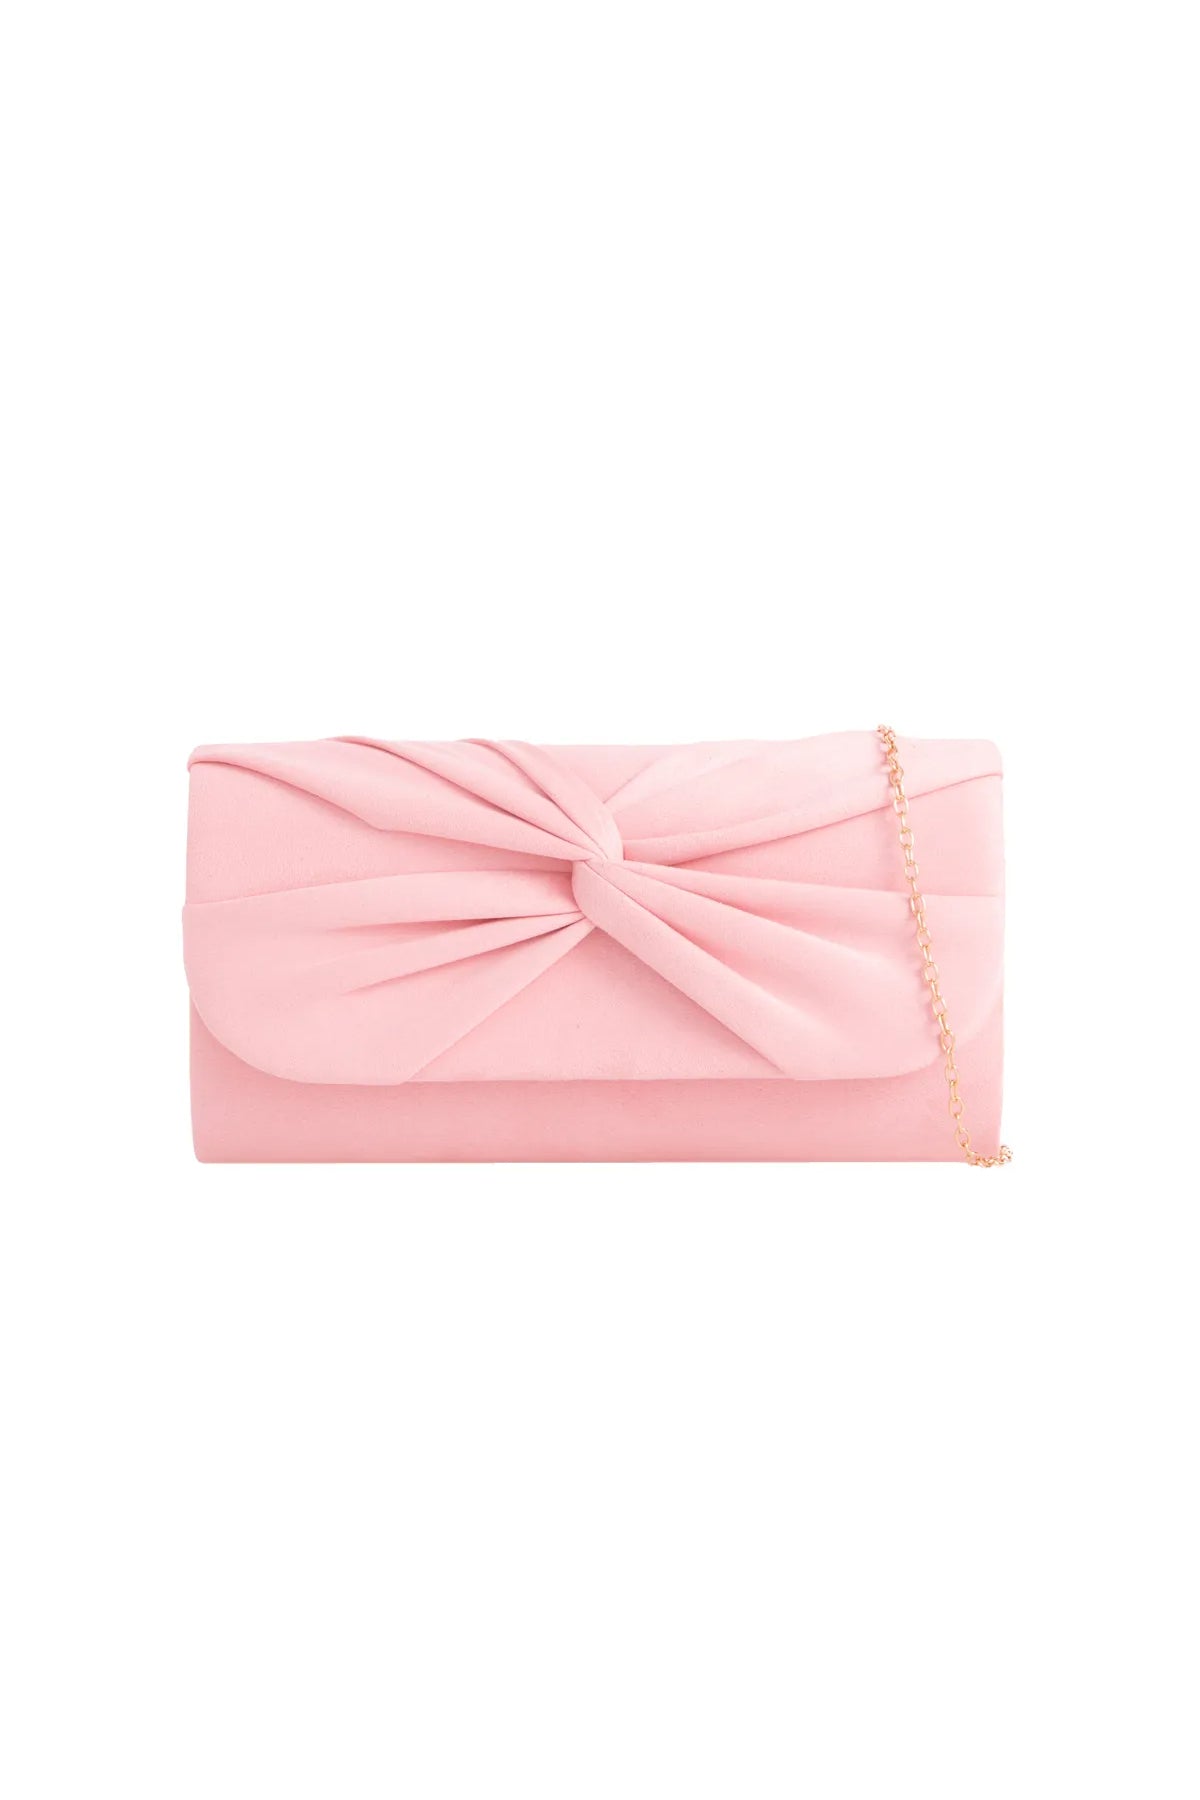 Pink Suede Clutch Bag with Knot Detail